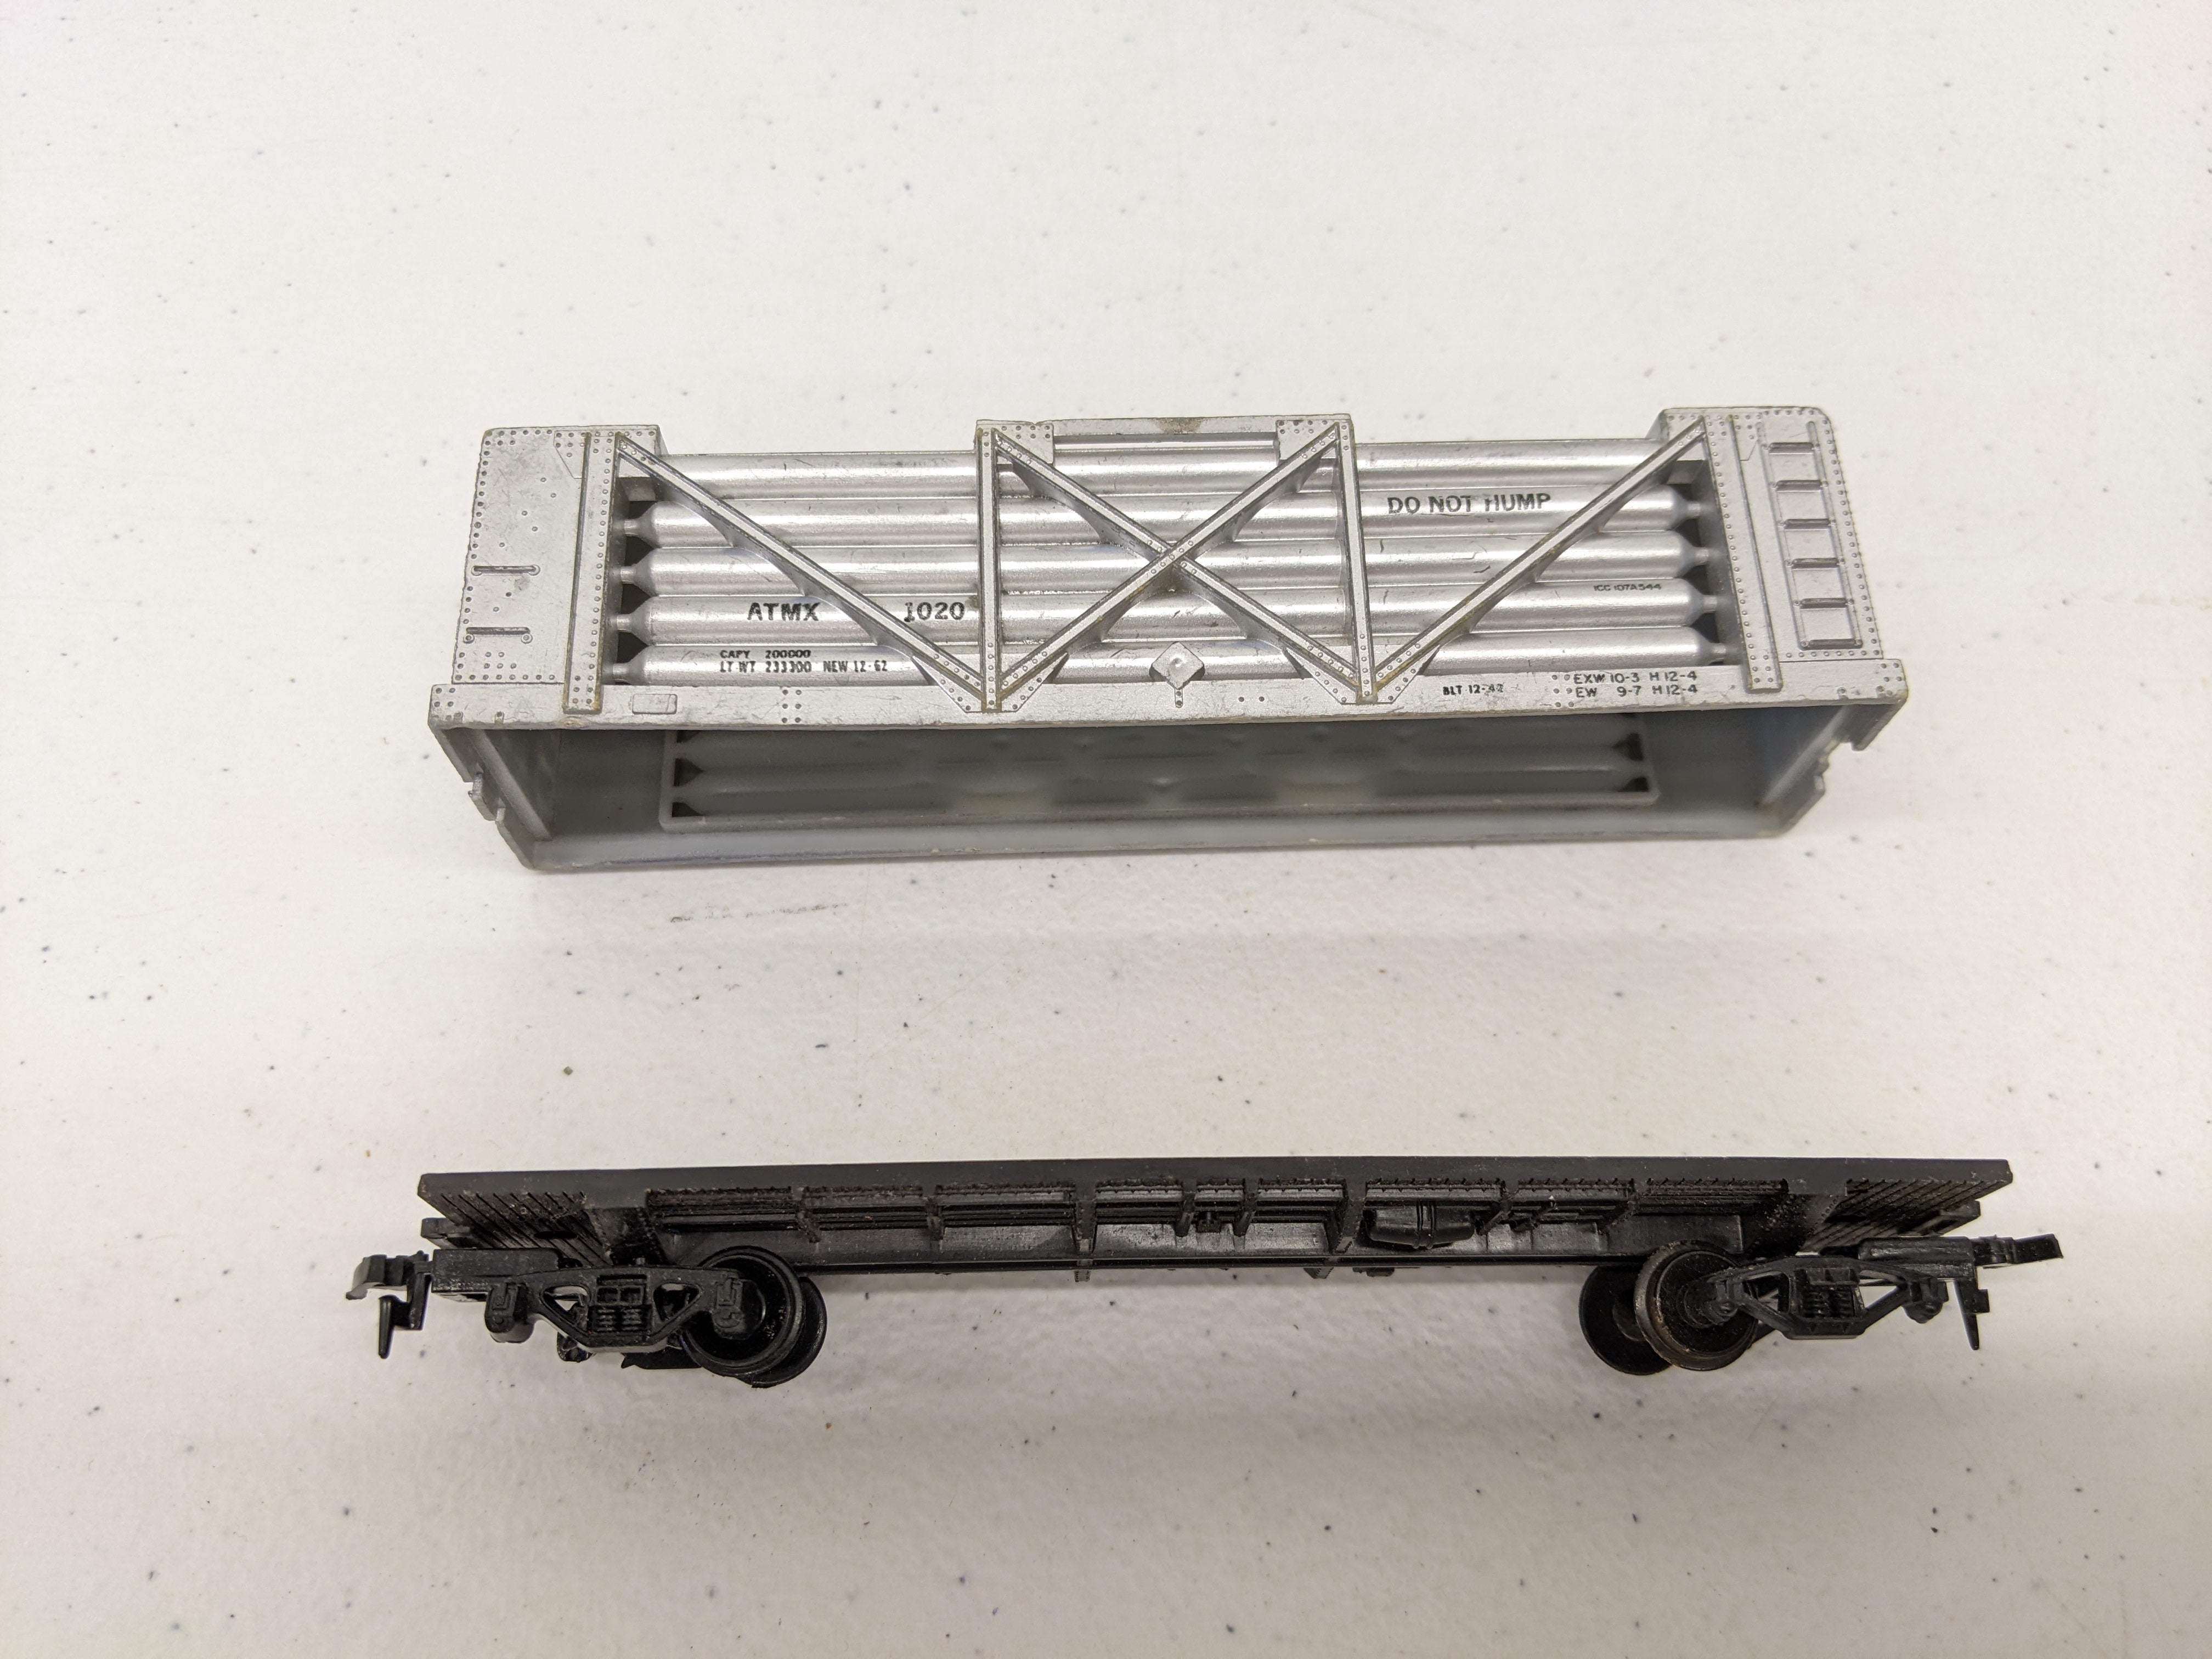 USED ROCO HO Scale, Helium Carrier Car, Atomic Energy Commission ATMX #1020